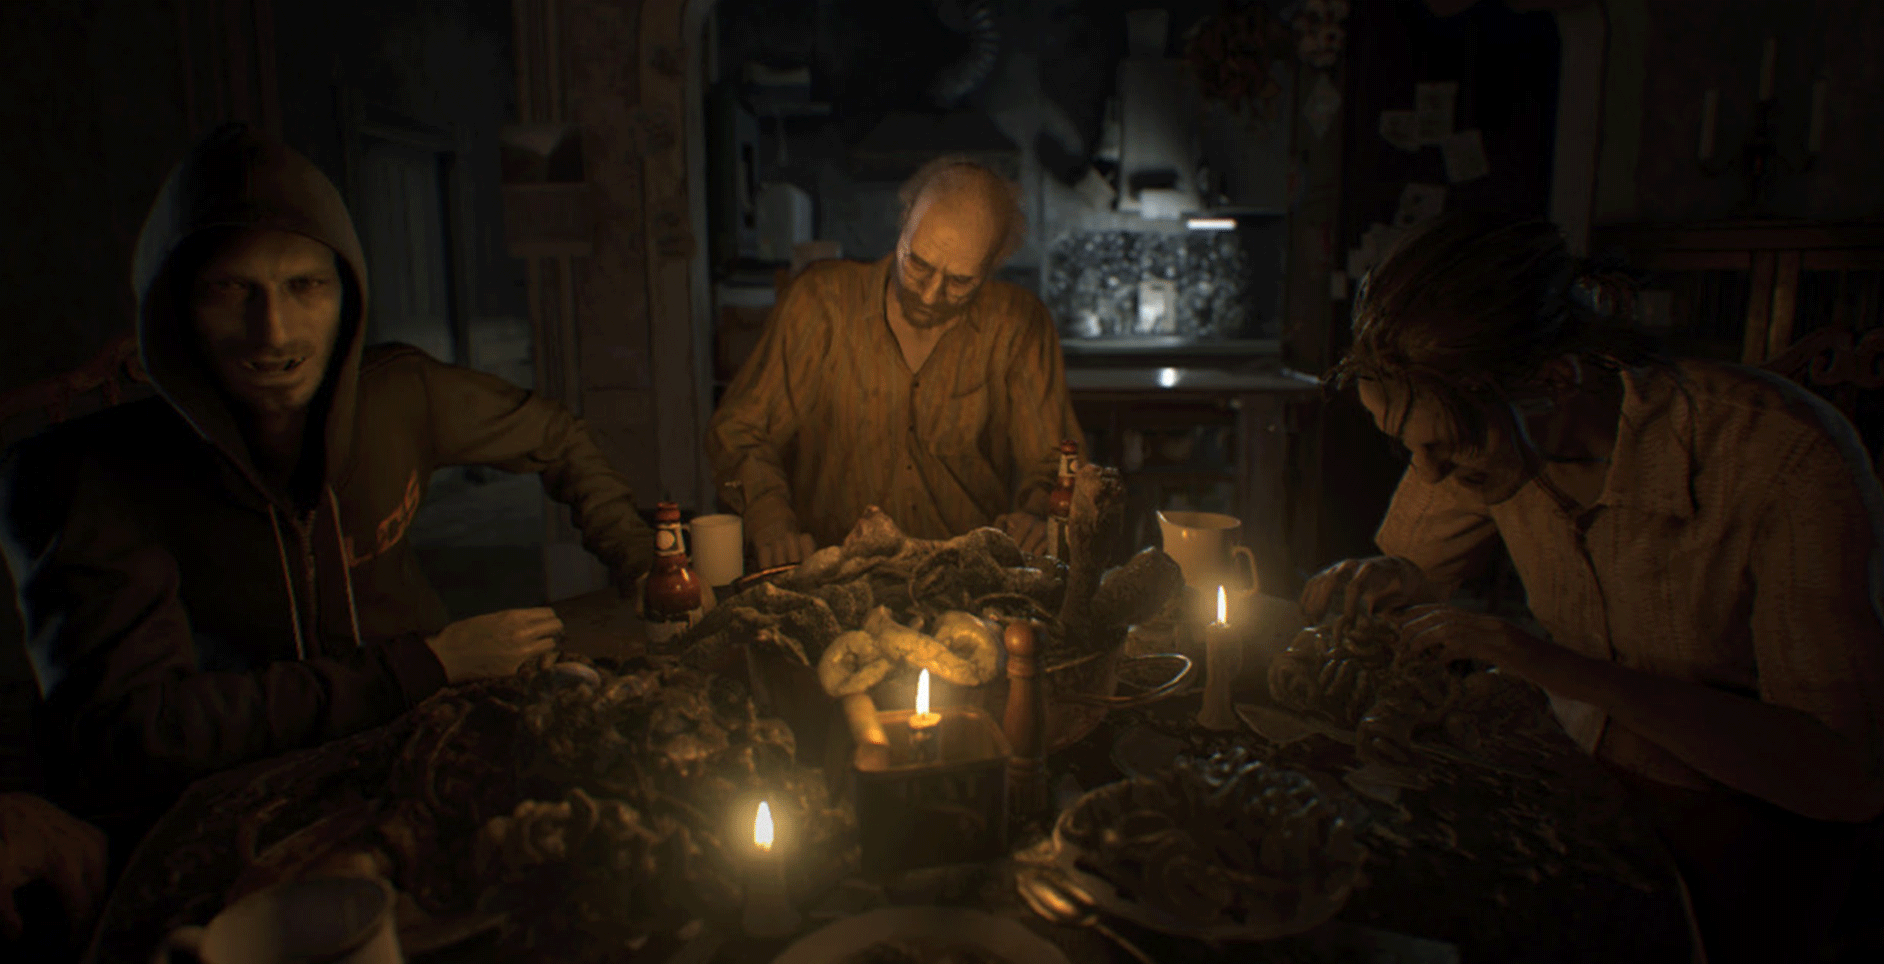 I was genuinely concerned for Resident Evil 7 when it was first unveiled